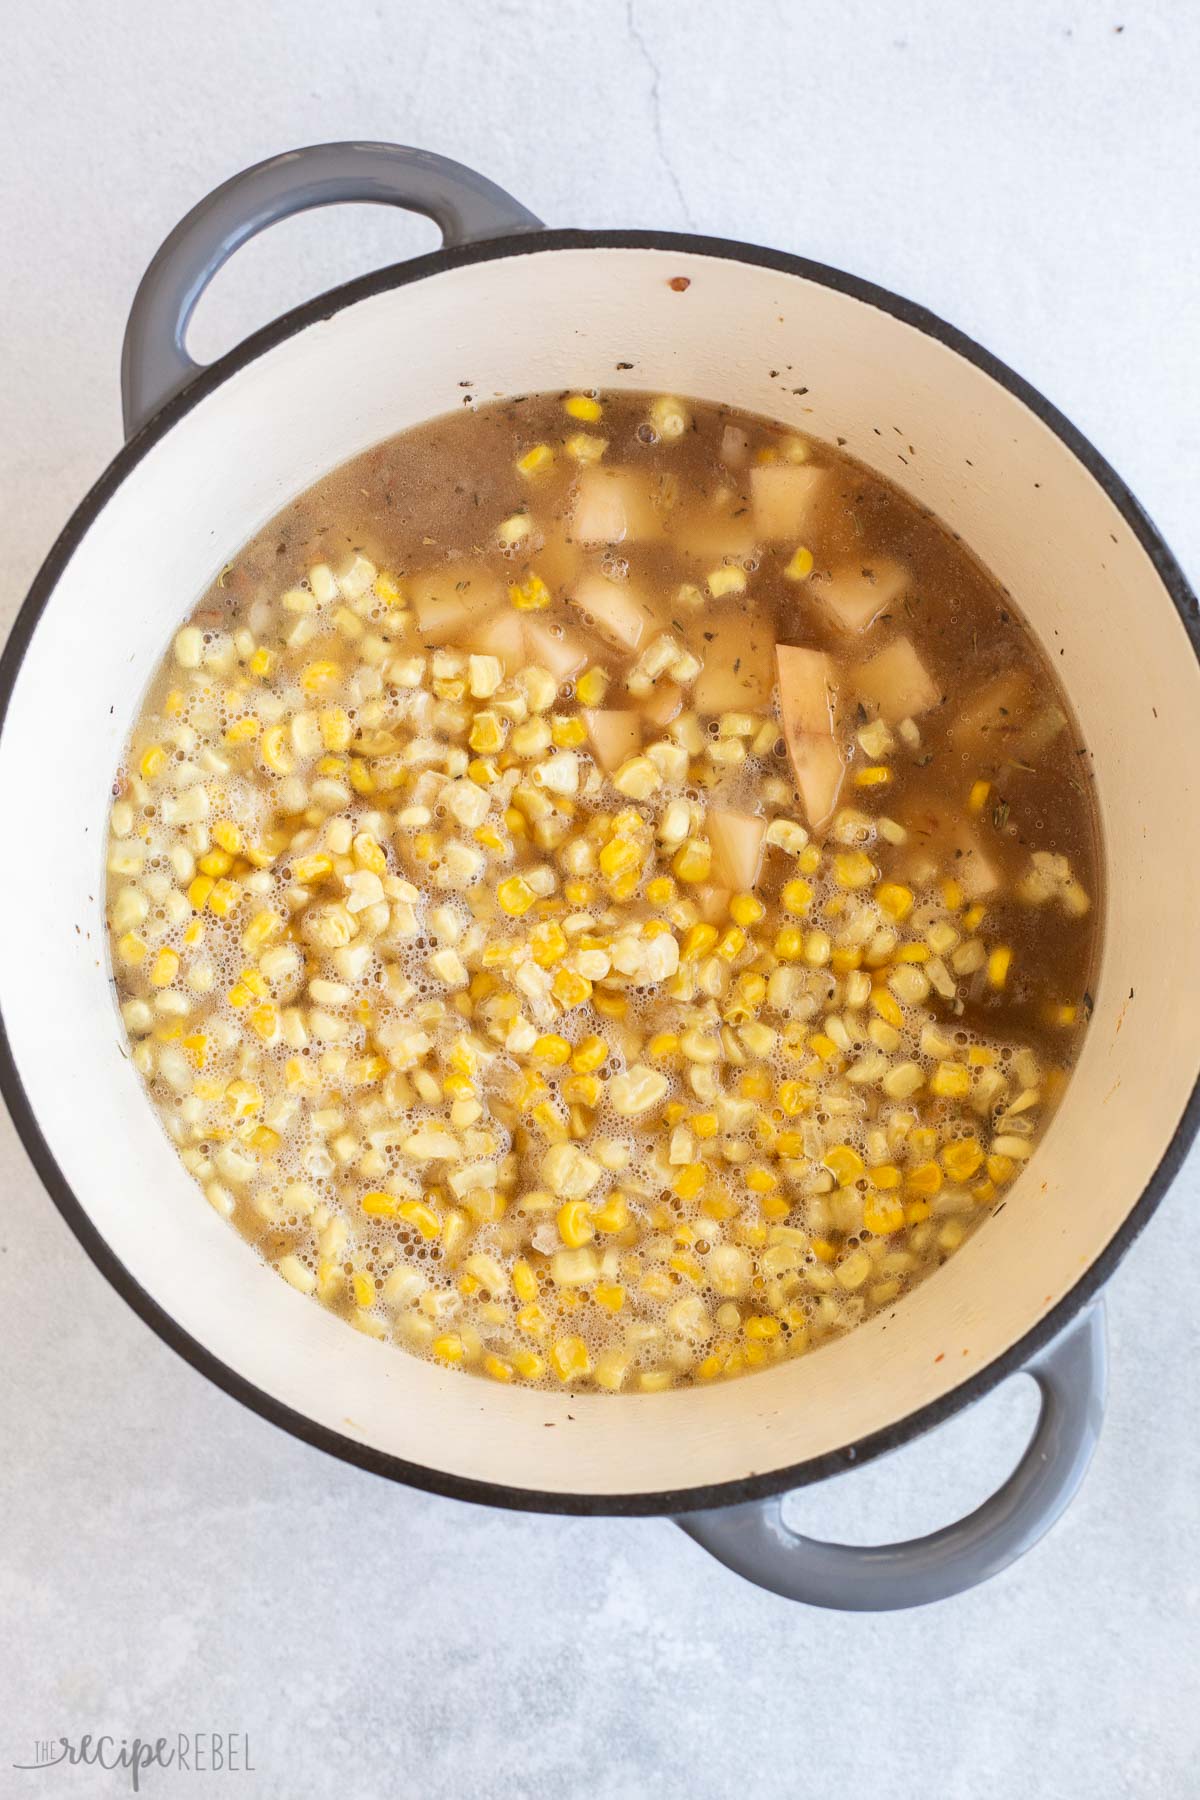 potatoes and corn added to soup.